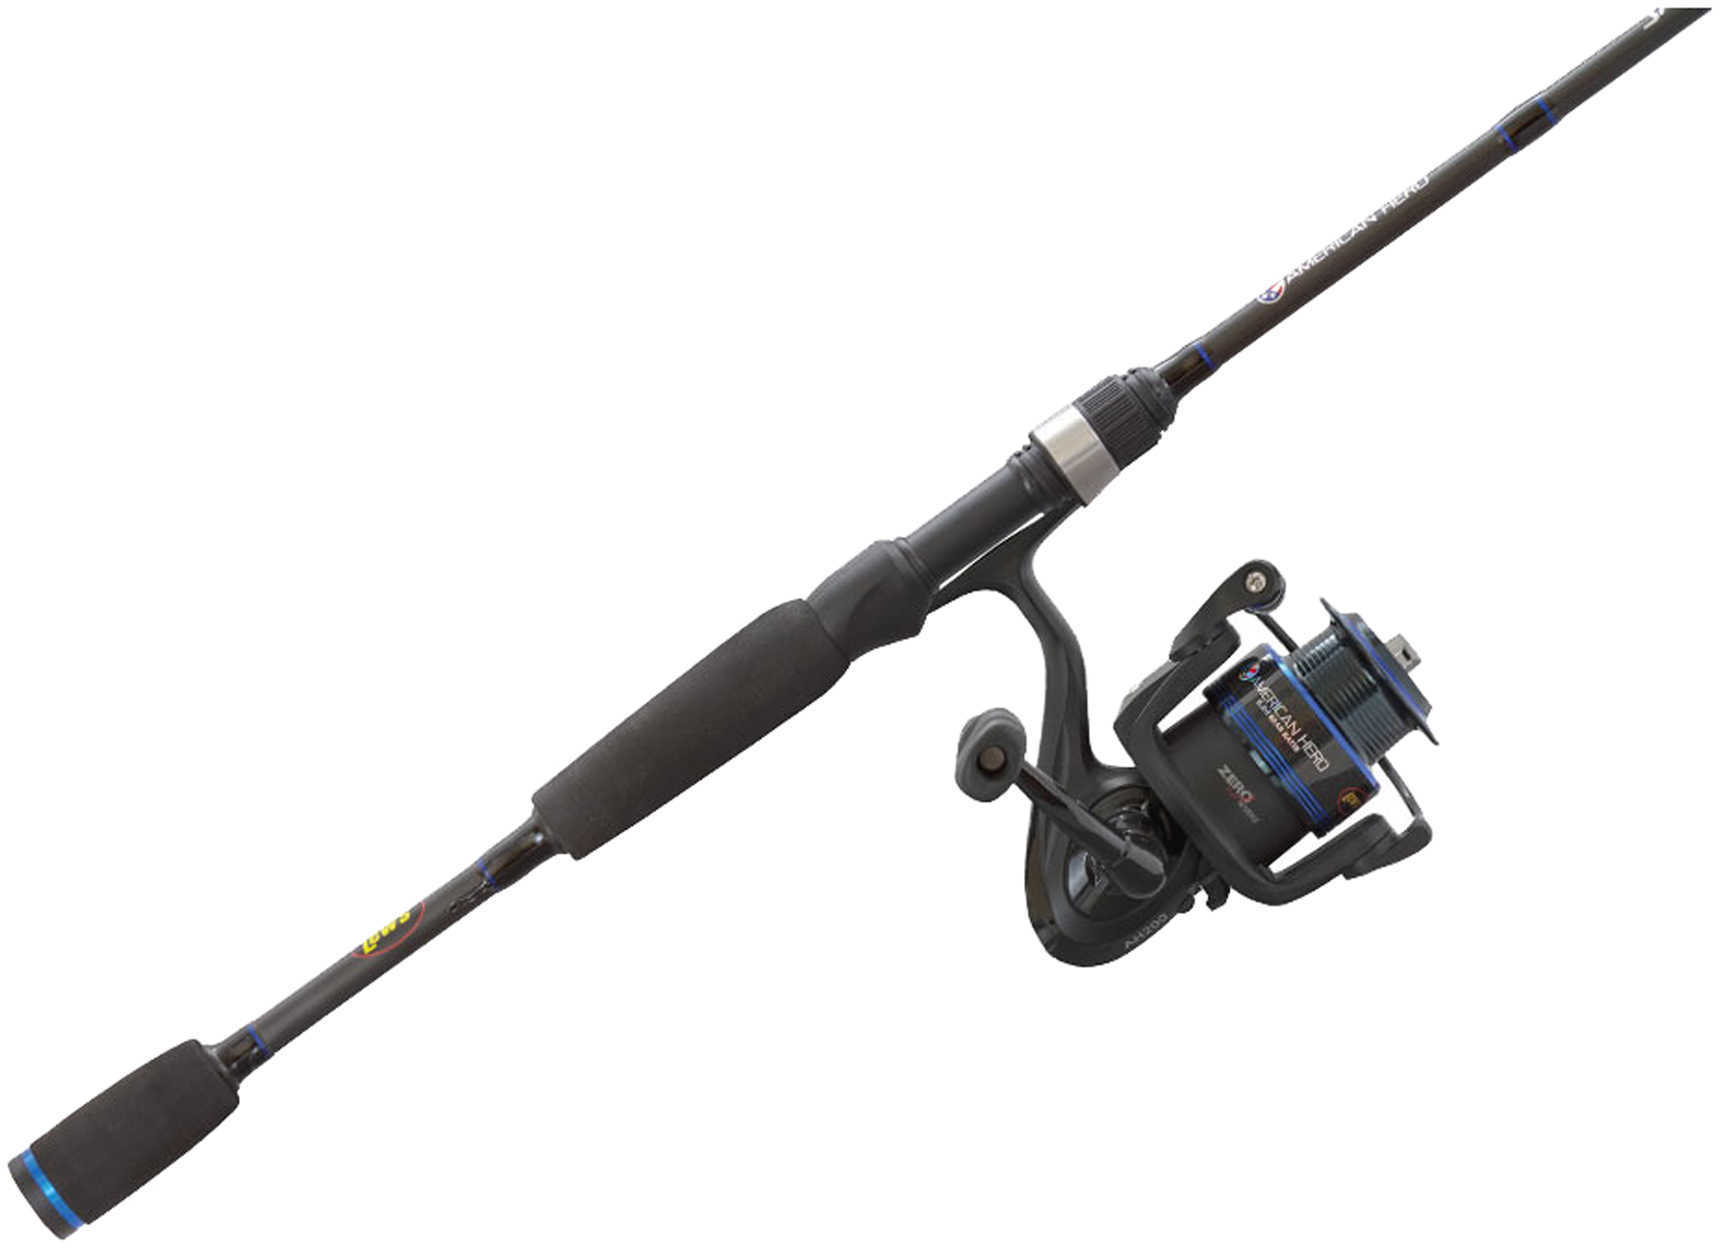 Lew's American Hero Camo 7'0" Med 2-Piece Fishing Rod/Spinning Reel Combo #AHC40 